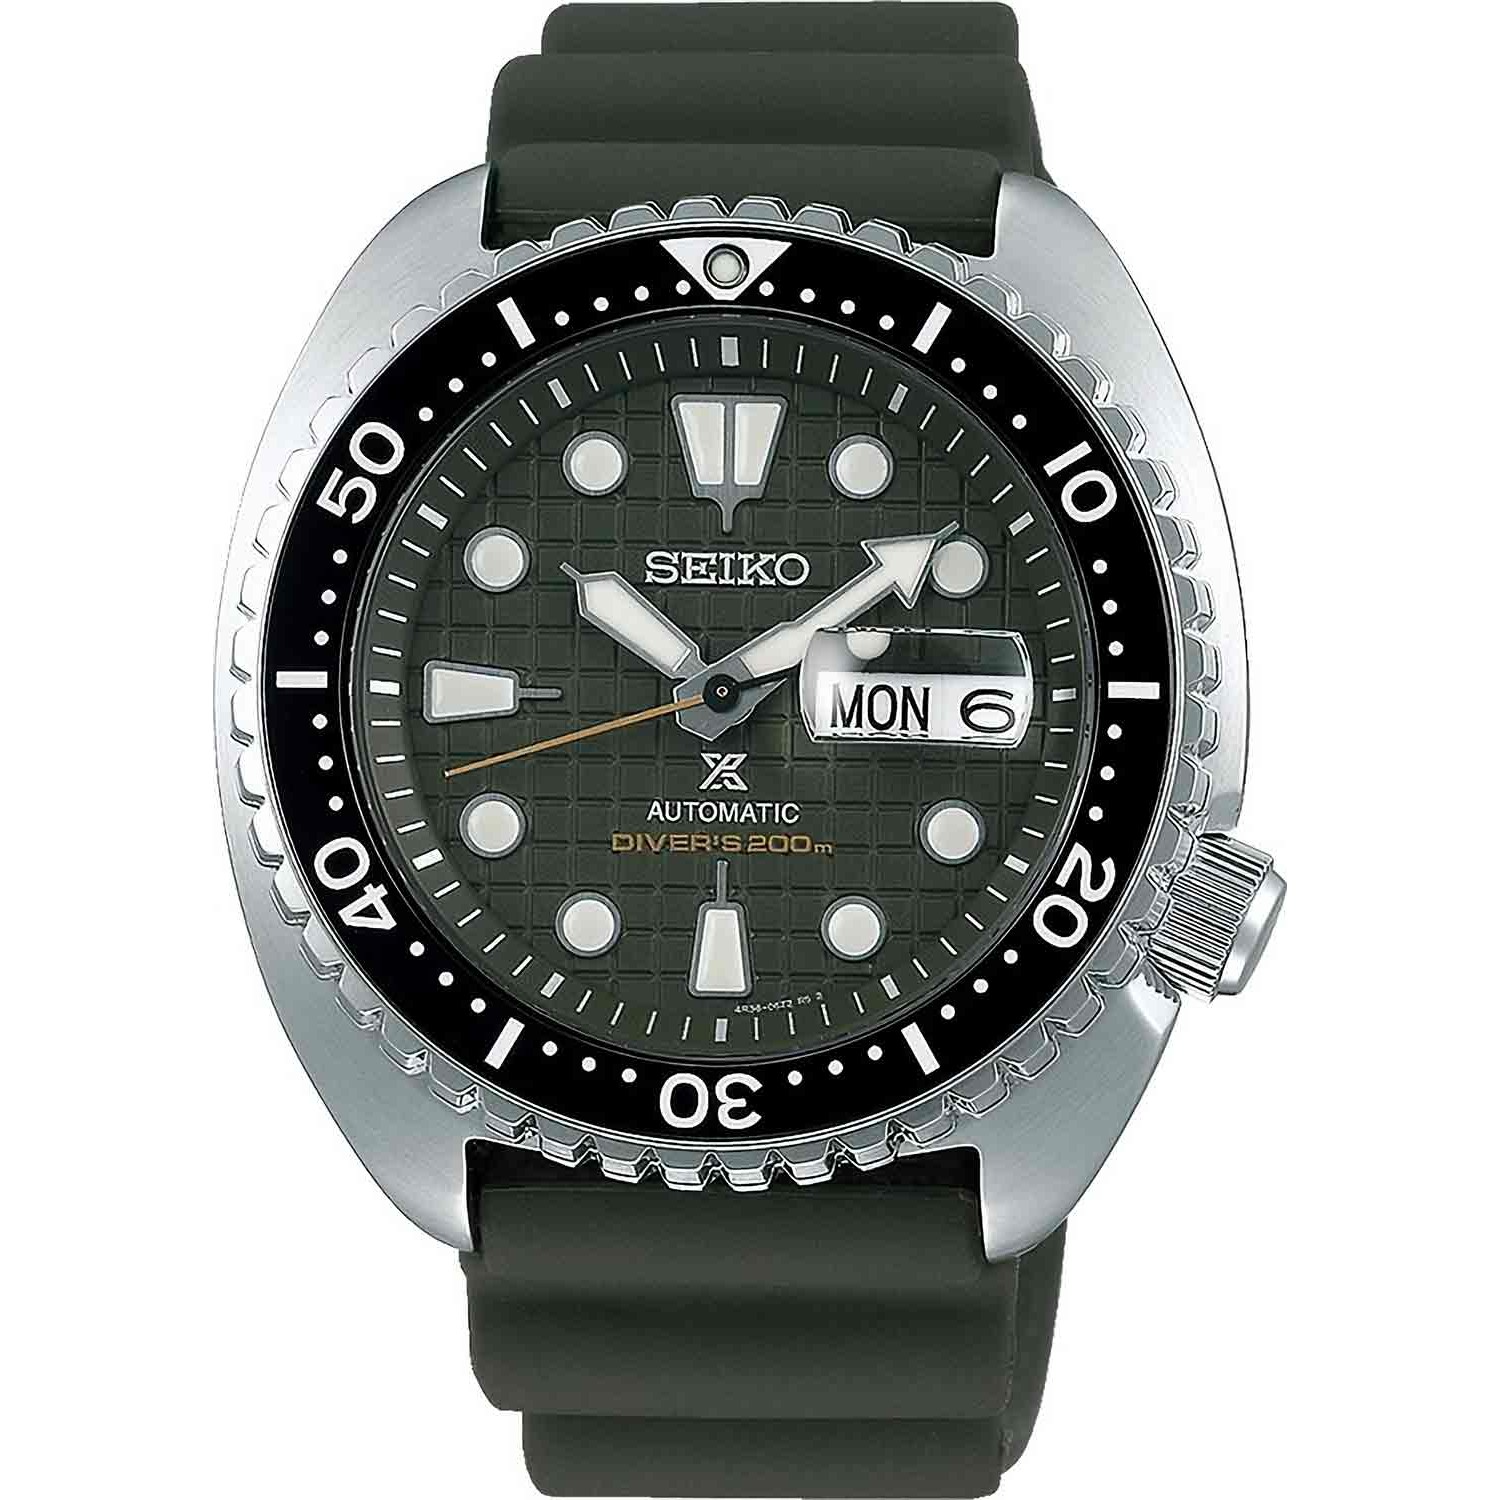 SRPE05K SEIKO Prospex King Turtle Green Special Edition. The Seiko SRPE05K Automatic Prospex 200m Divers Watch Green King Turtle. This mens watch features a stainless steel case, with a screw lock crown and a screw case back. The Seiko SRPE05K features a 